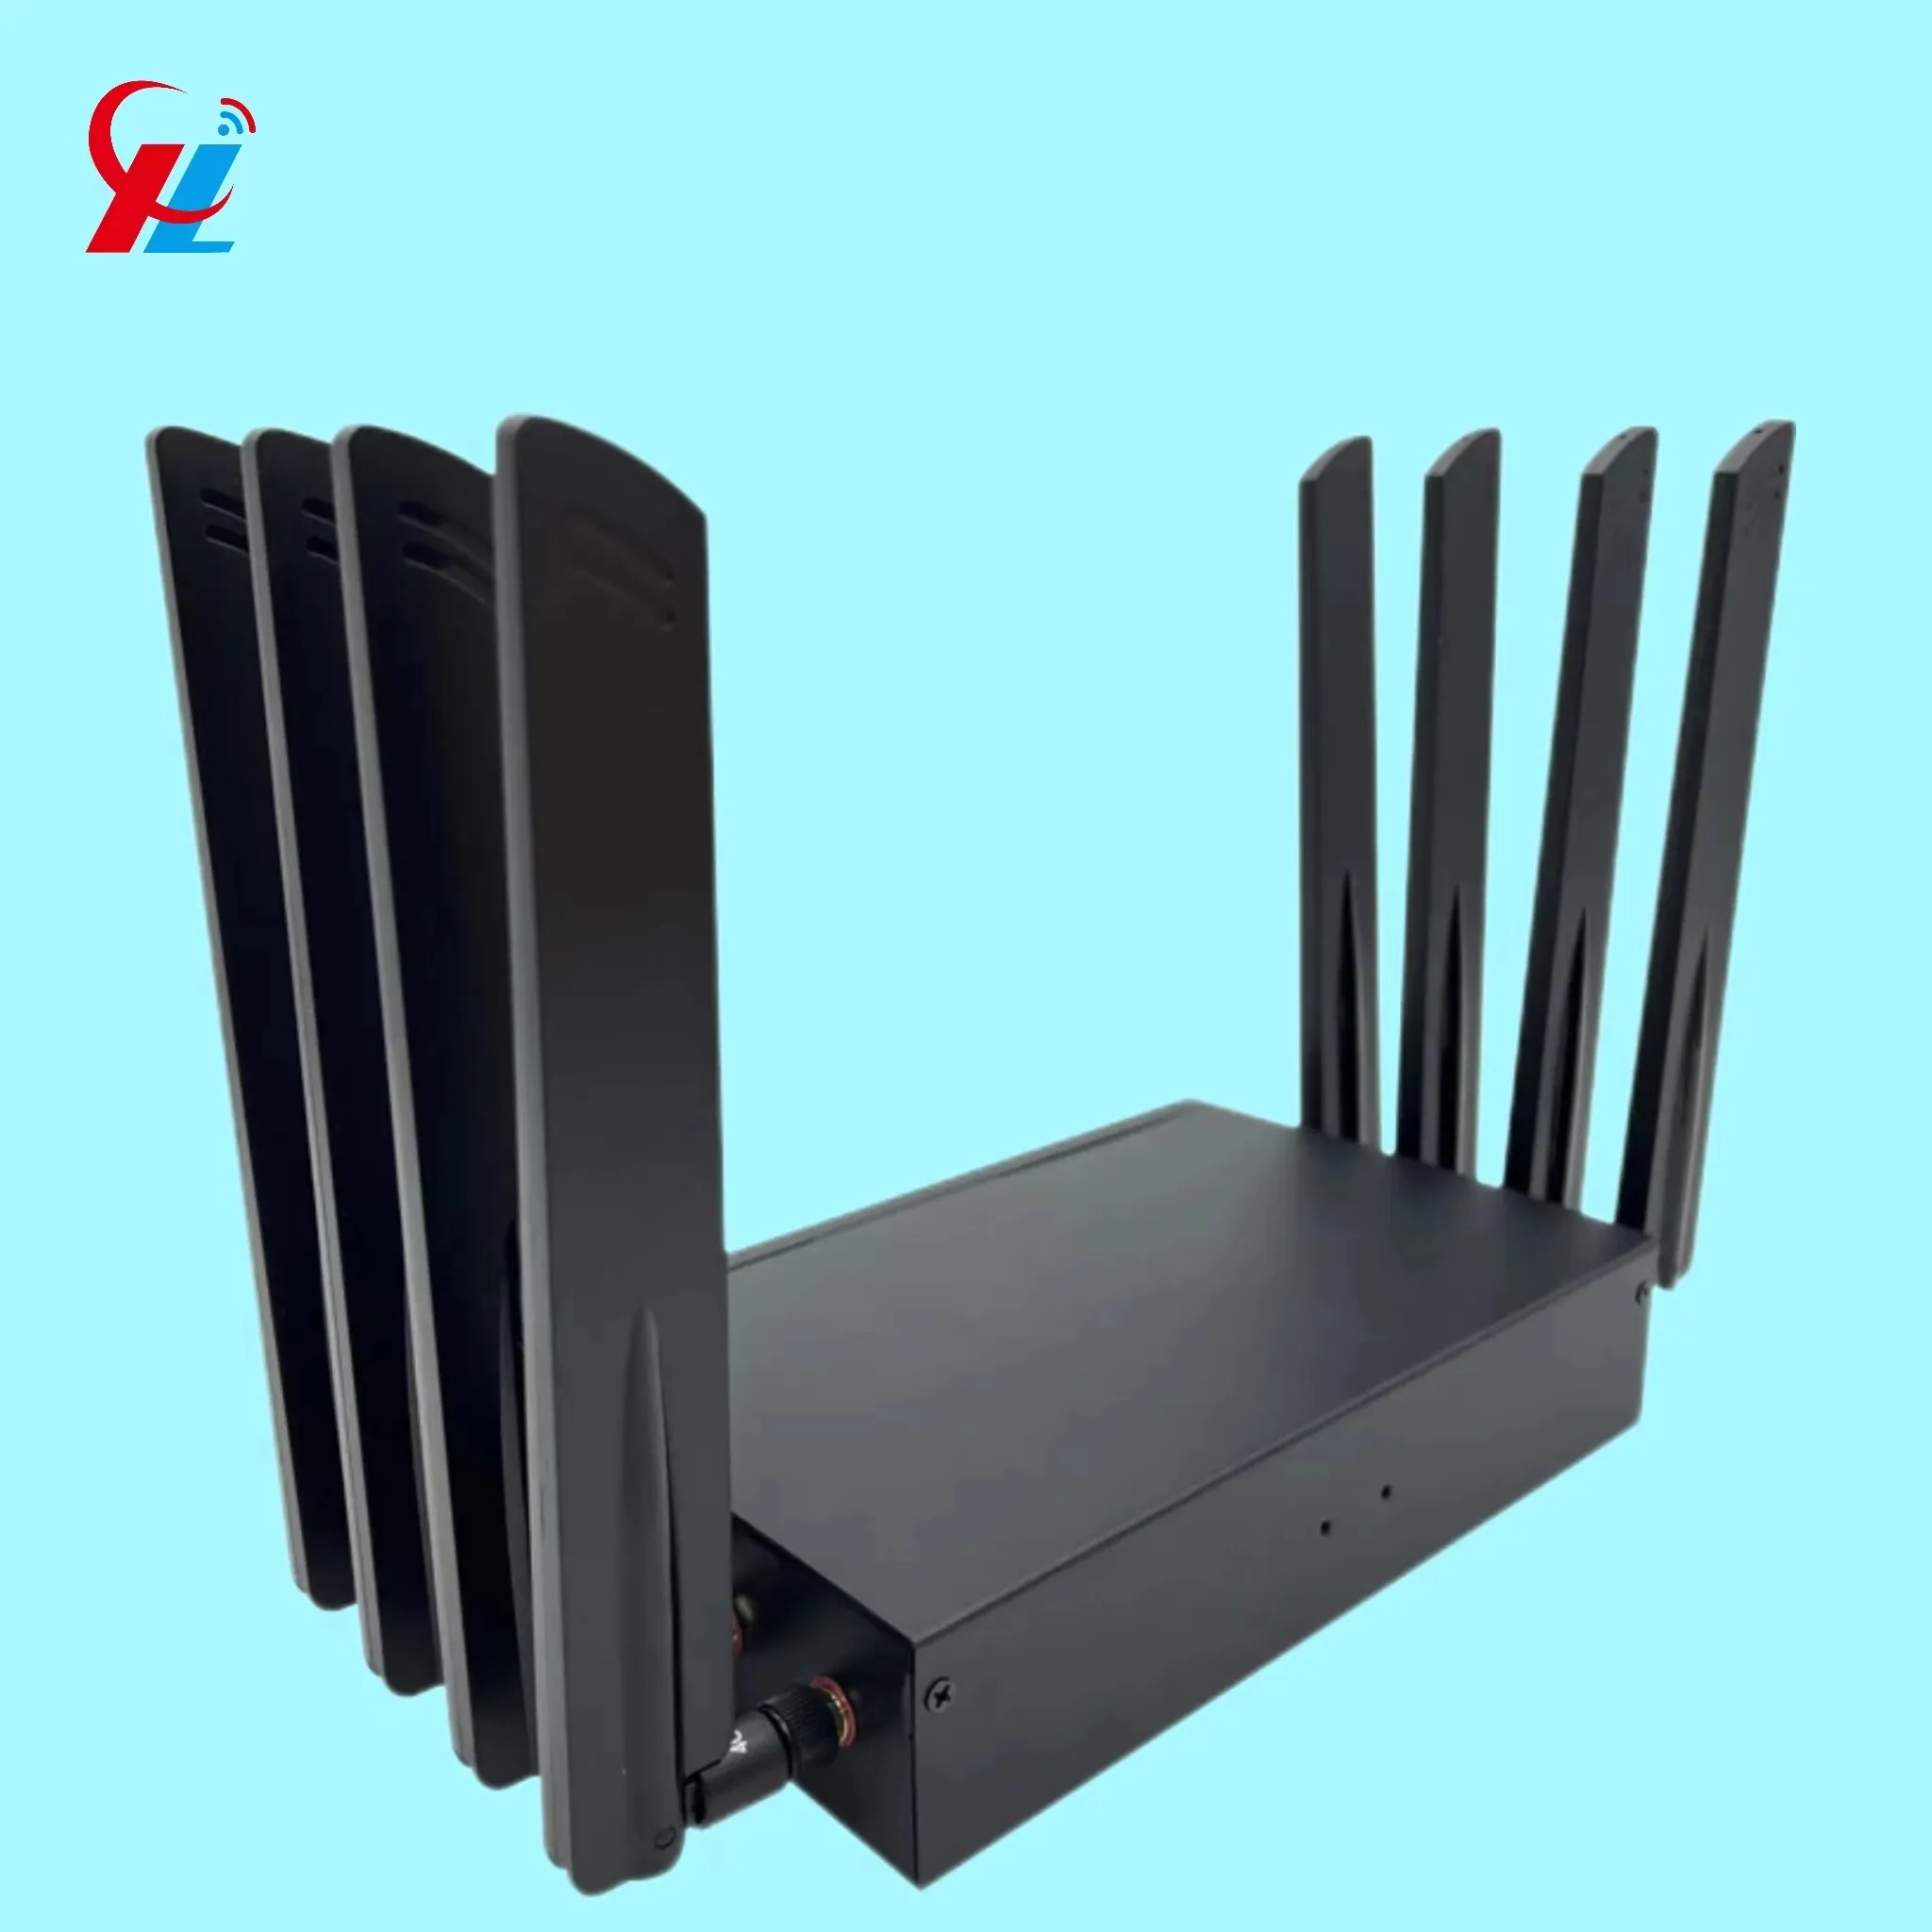 New Product Technology HC-G80 5G Hotspot Unlocked High Power 5G 4G LTE Wireless CPE Modem Router With 8 Multi Ports